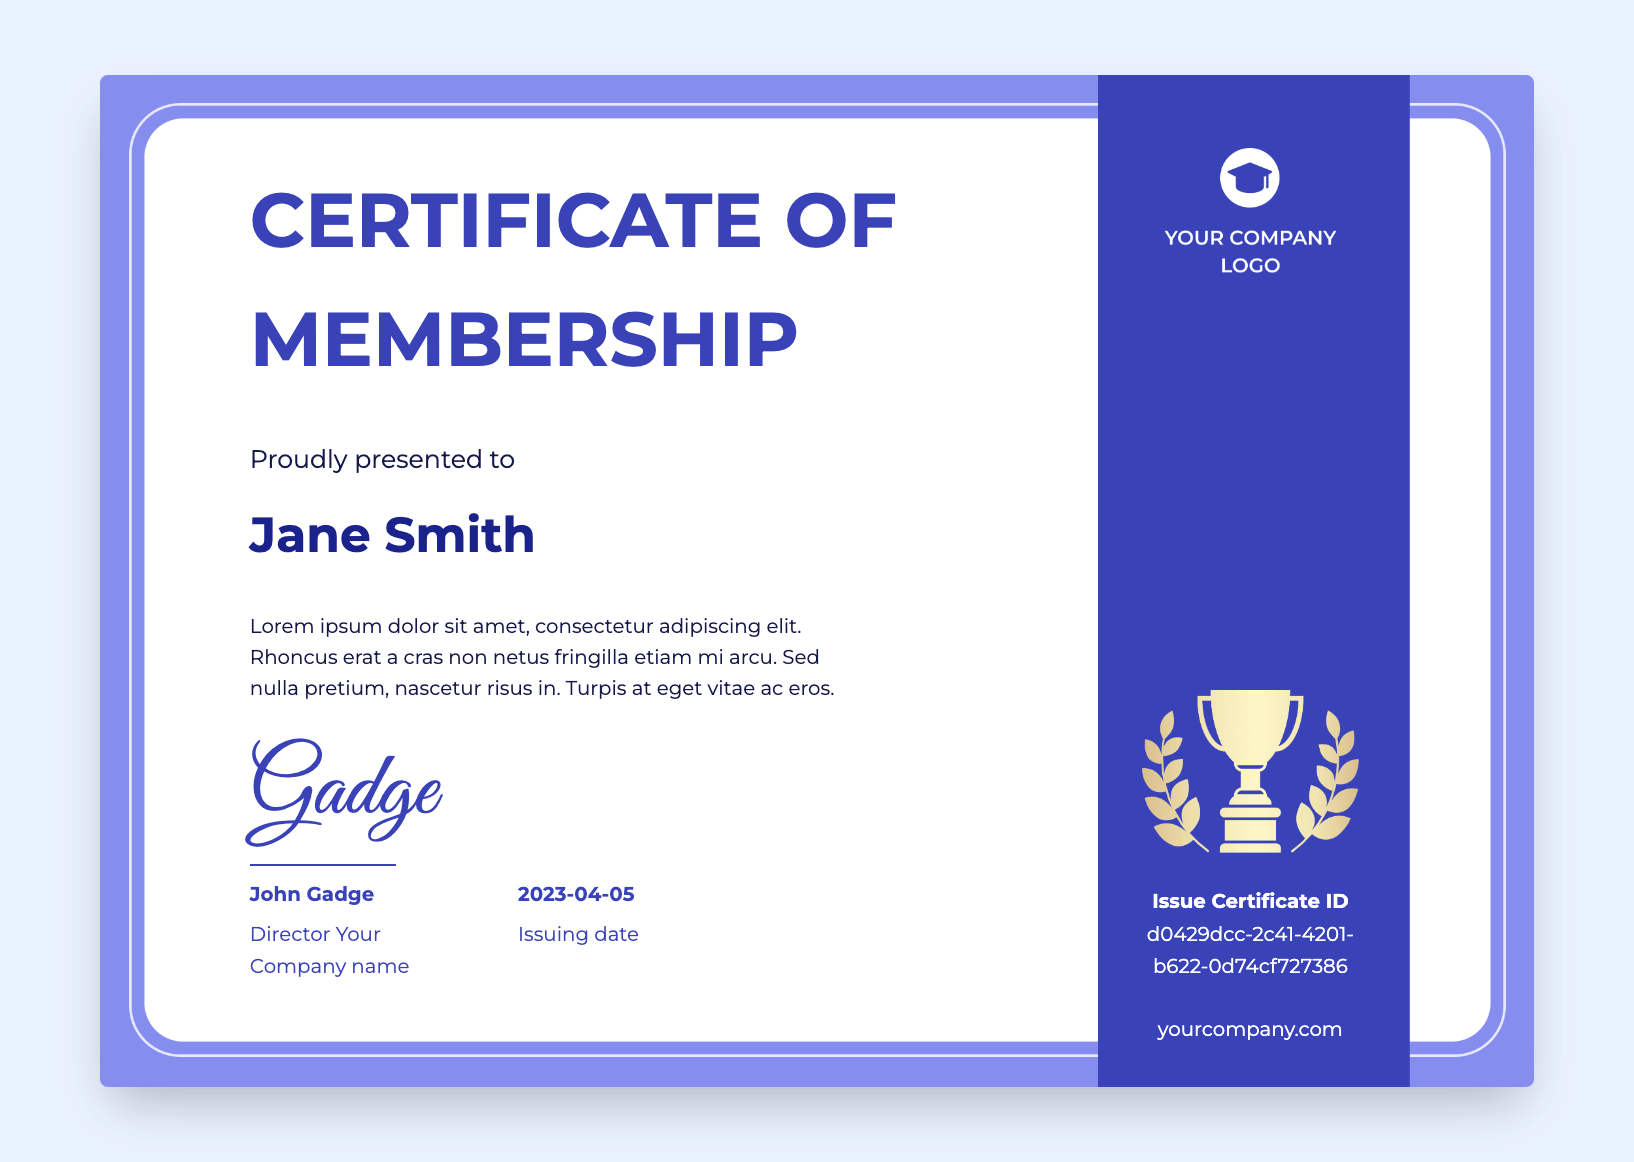 Amusing certificate of membership with different colors.